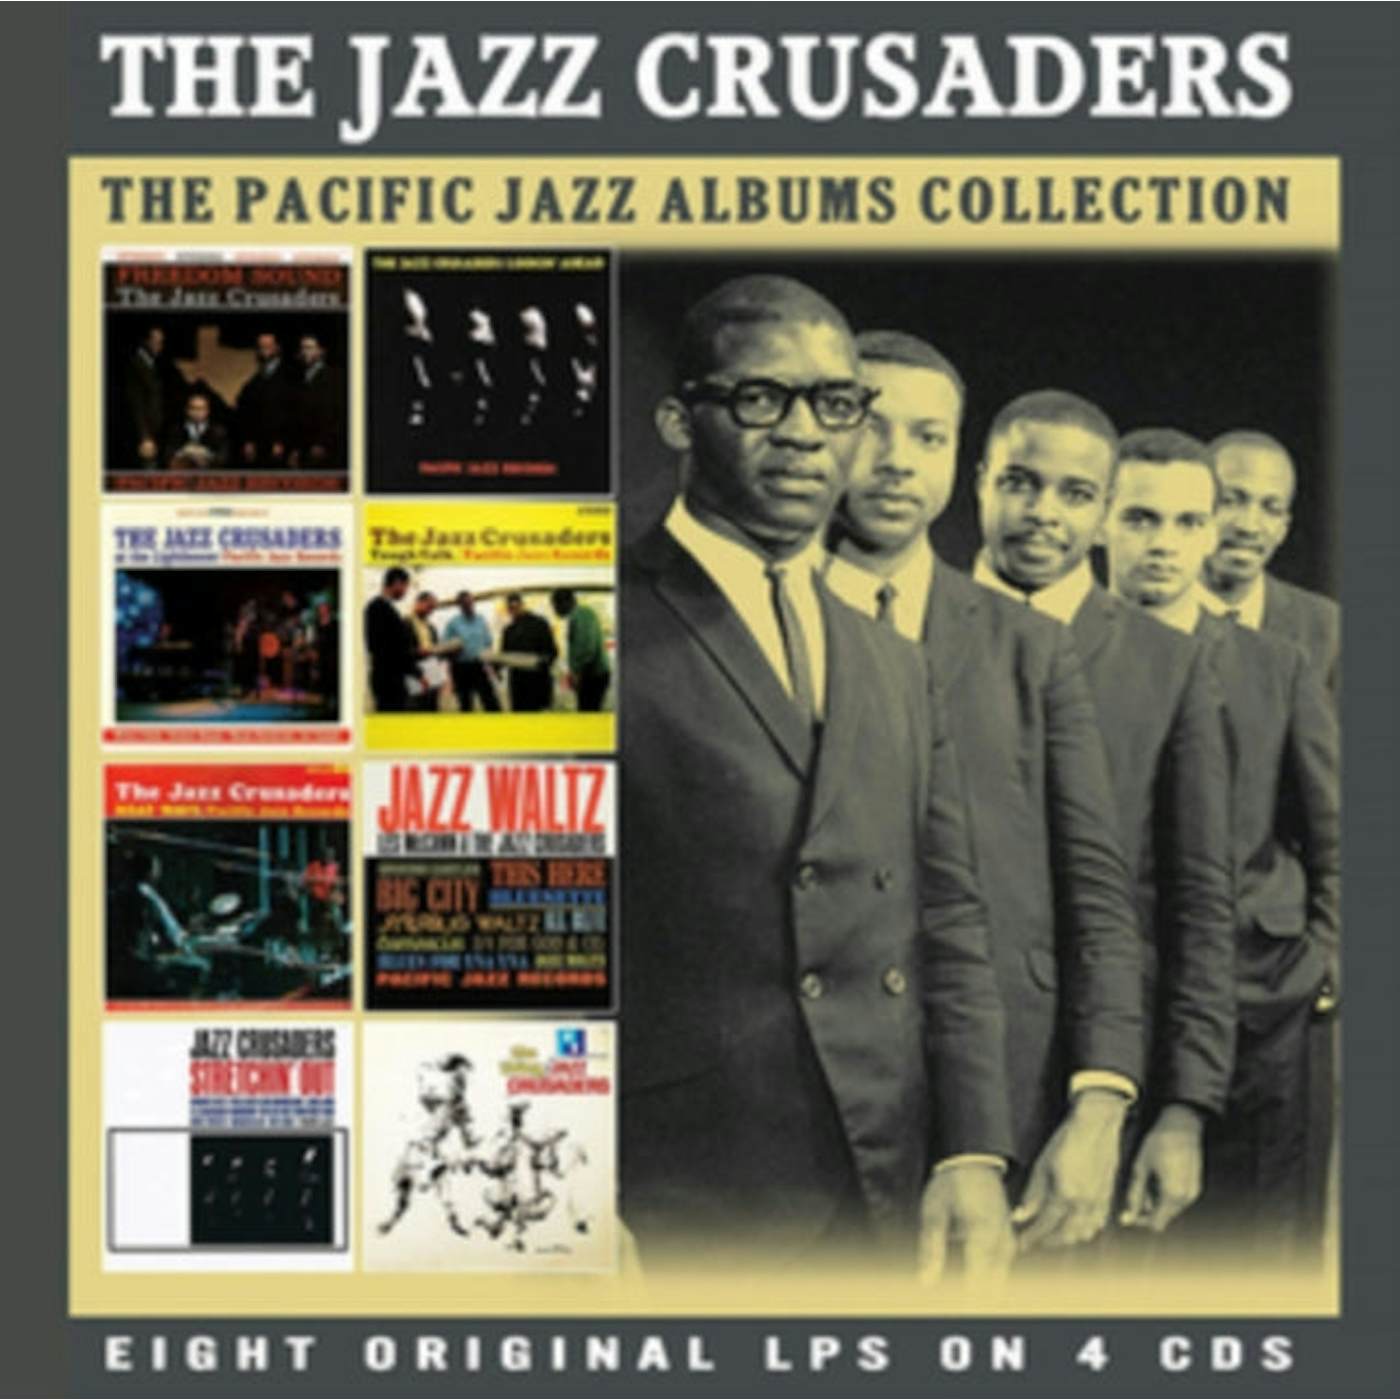 Jazz Crusaders CD - The Classic Pacific Jazz Albums